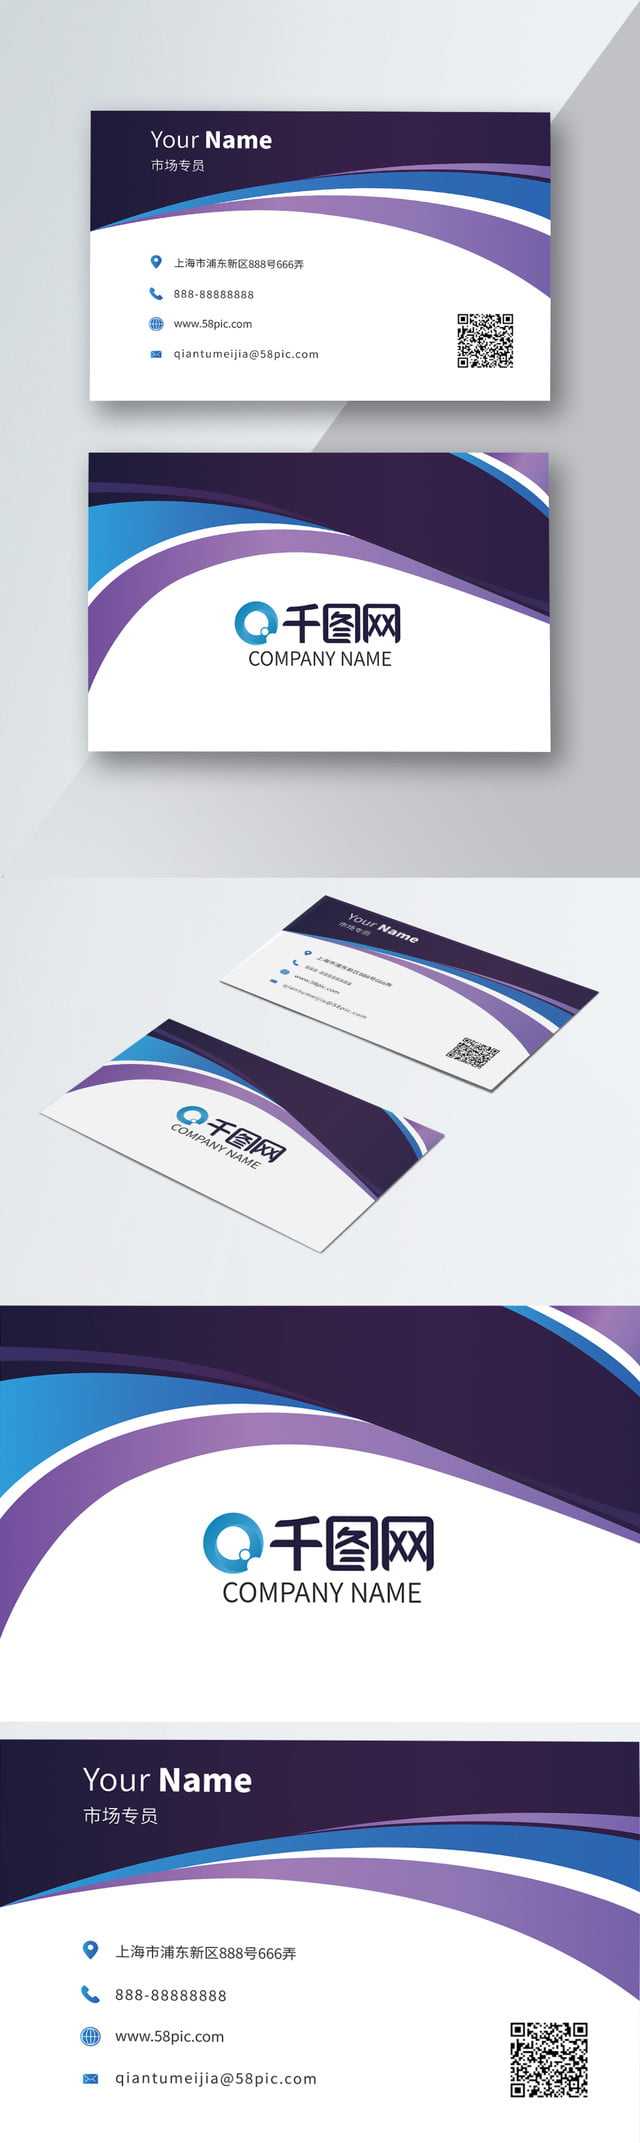 Business Card Pos Machine Installation Unionpay Logo With Plastering Business Cards Templates